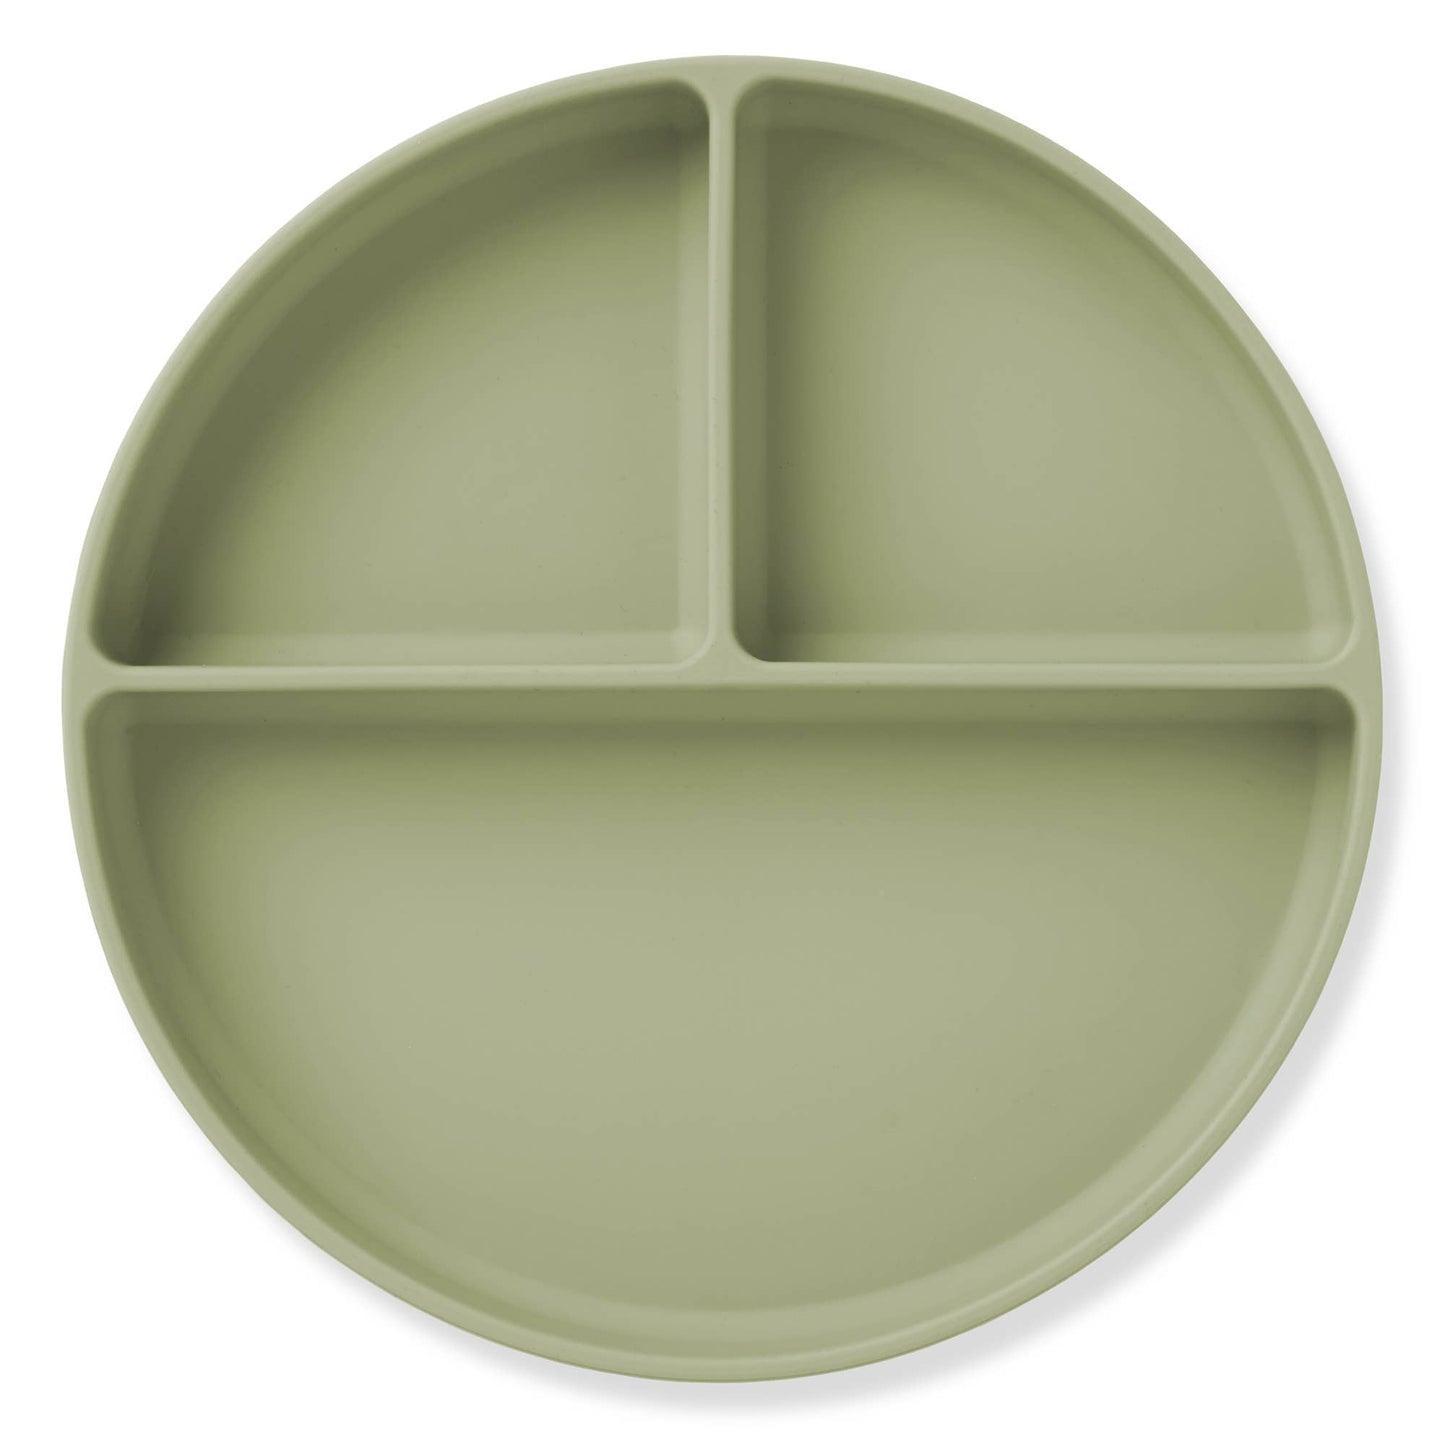 Ali+Oli Baby Plate with Suction and Divided Portions in Sage